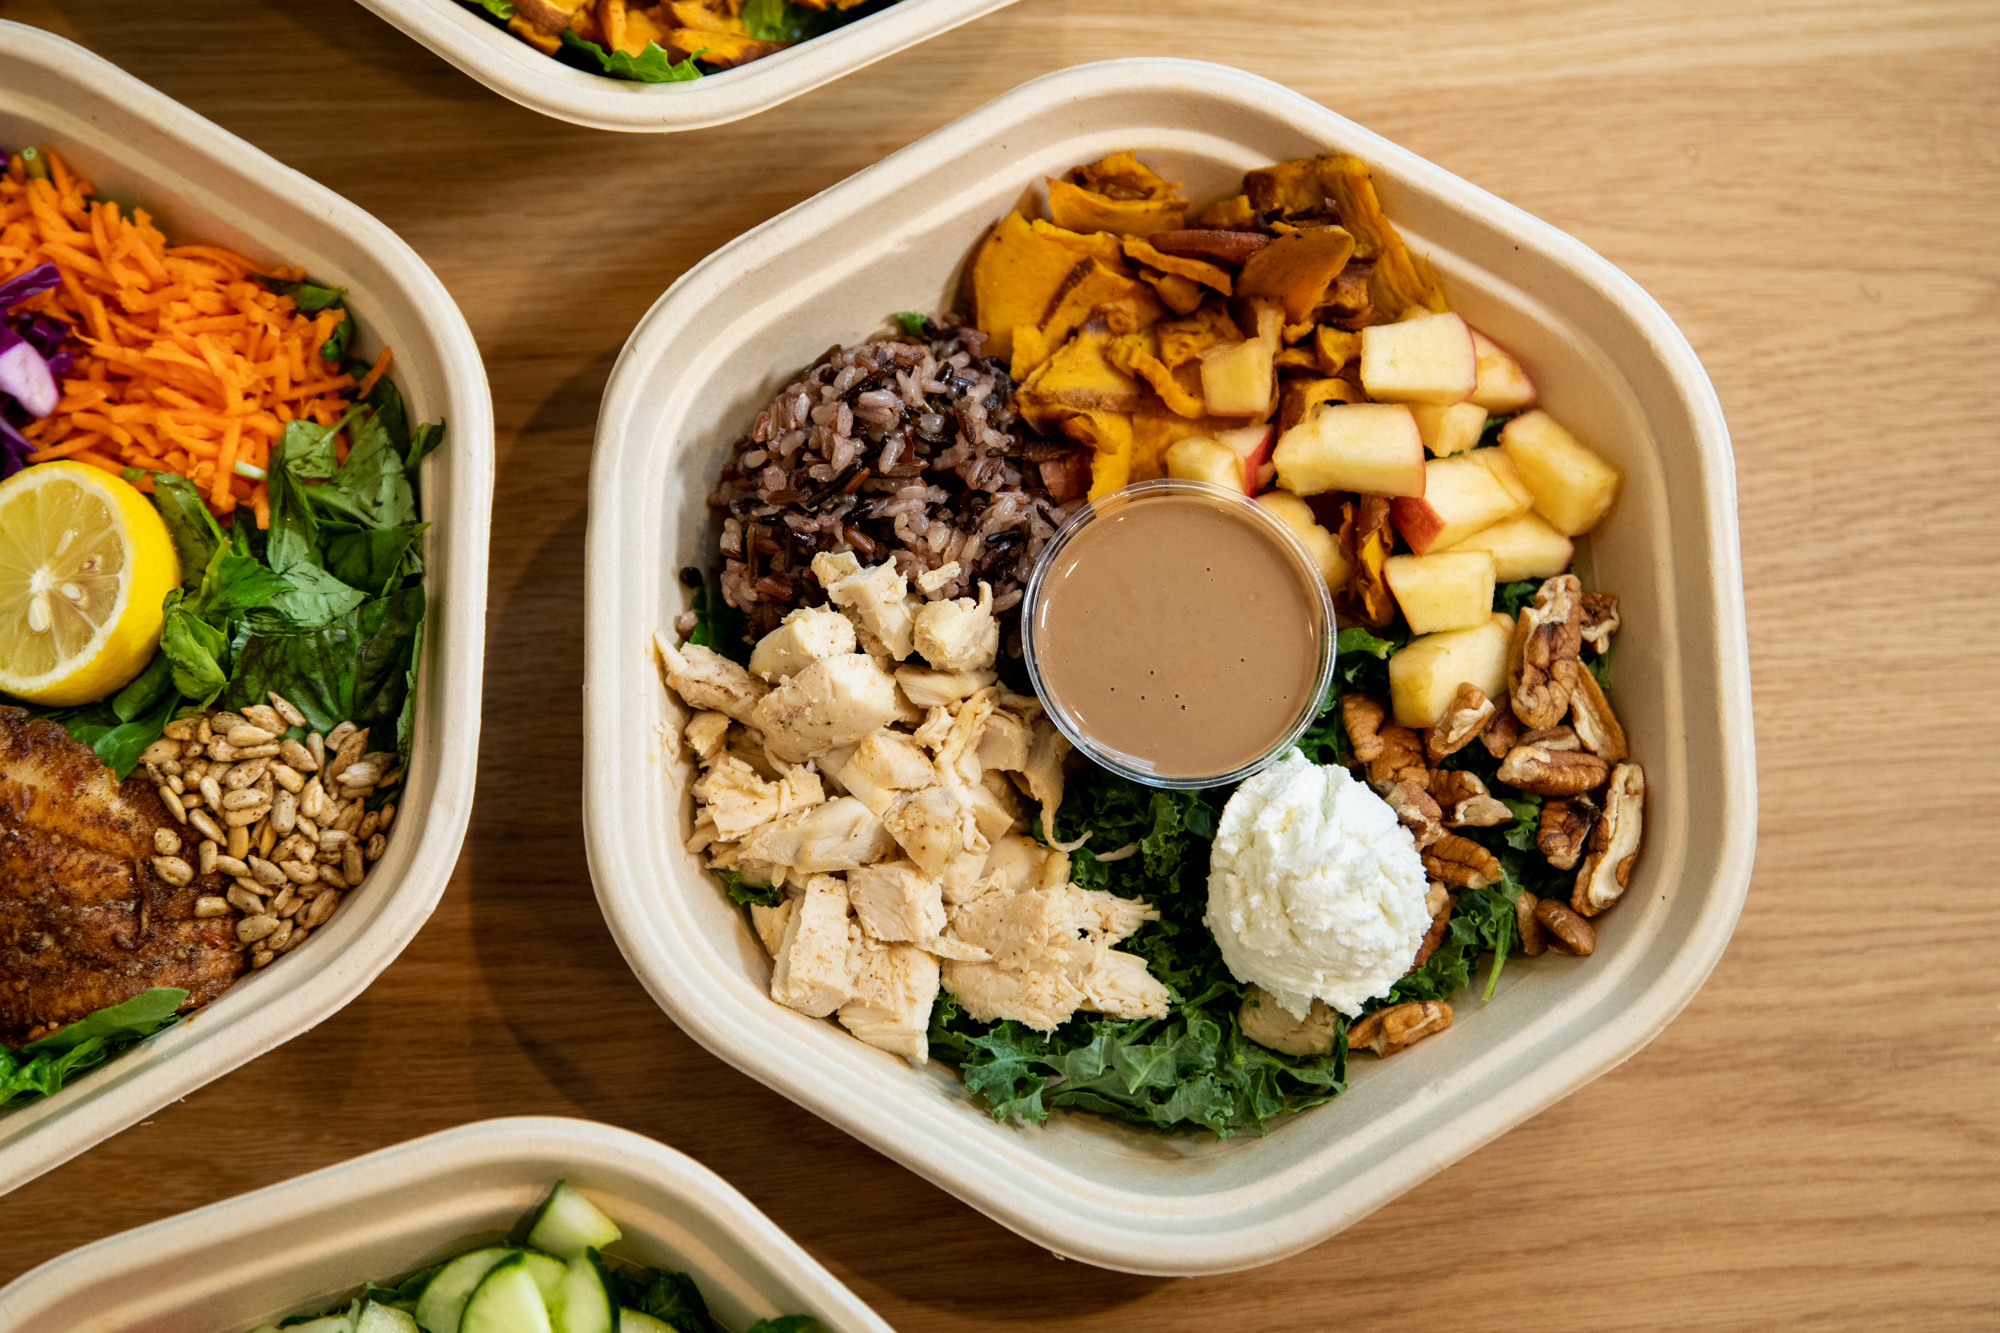 Sweetgreen to open Lenox Square Mall location - Atlanta Business Chronicle